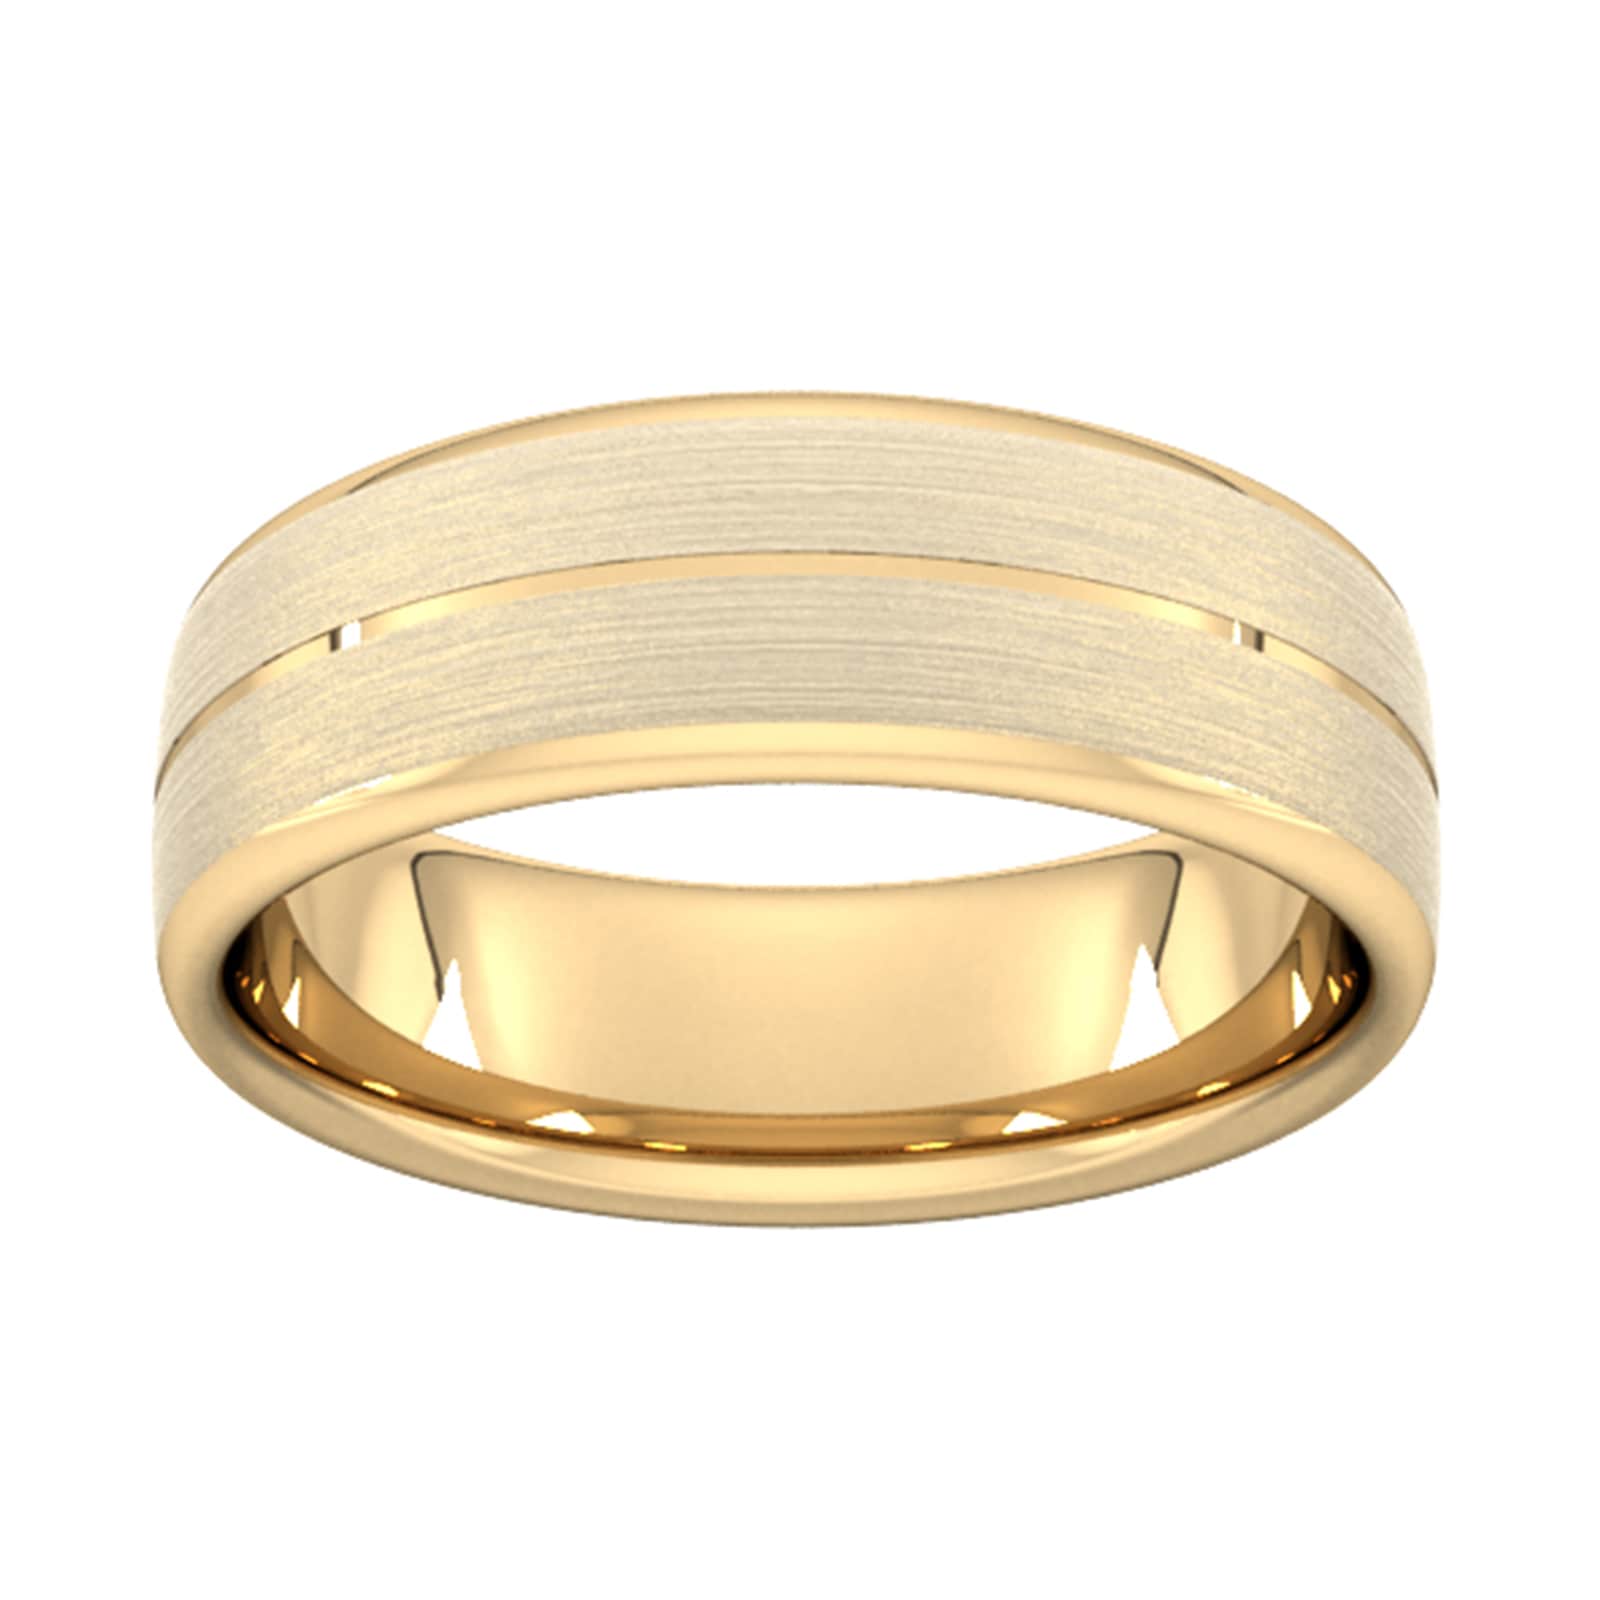 7mm D Shape Heavy Centre Groove With Chamfered Edge Wedding Ring In 9 Carat Yellow Gold - Ring Size G